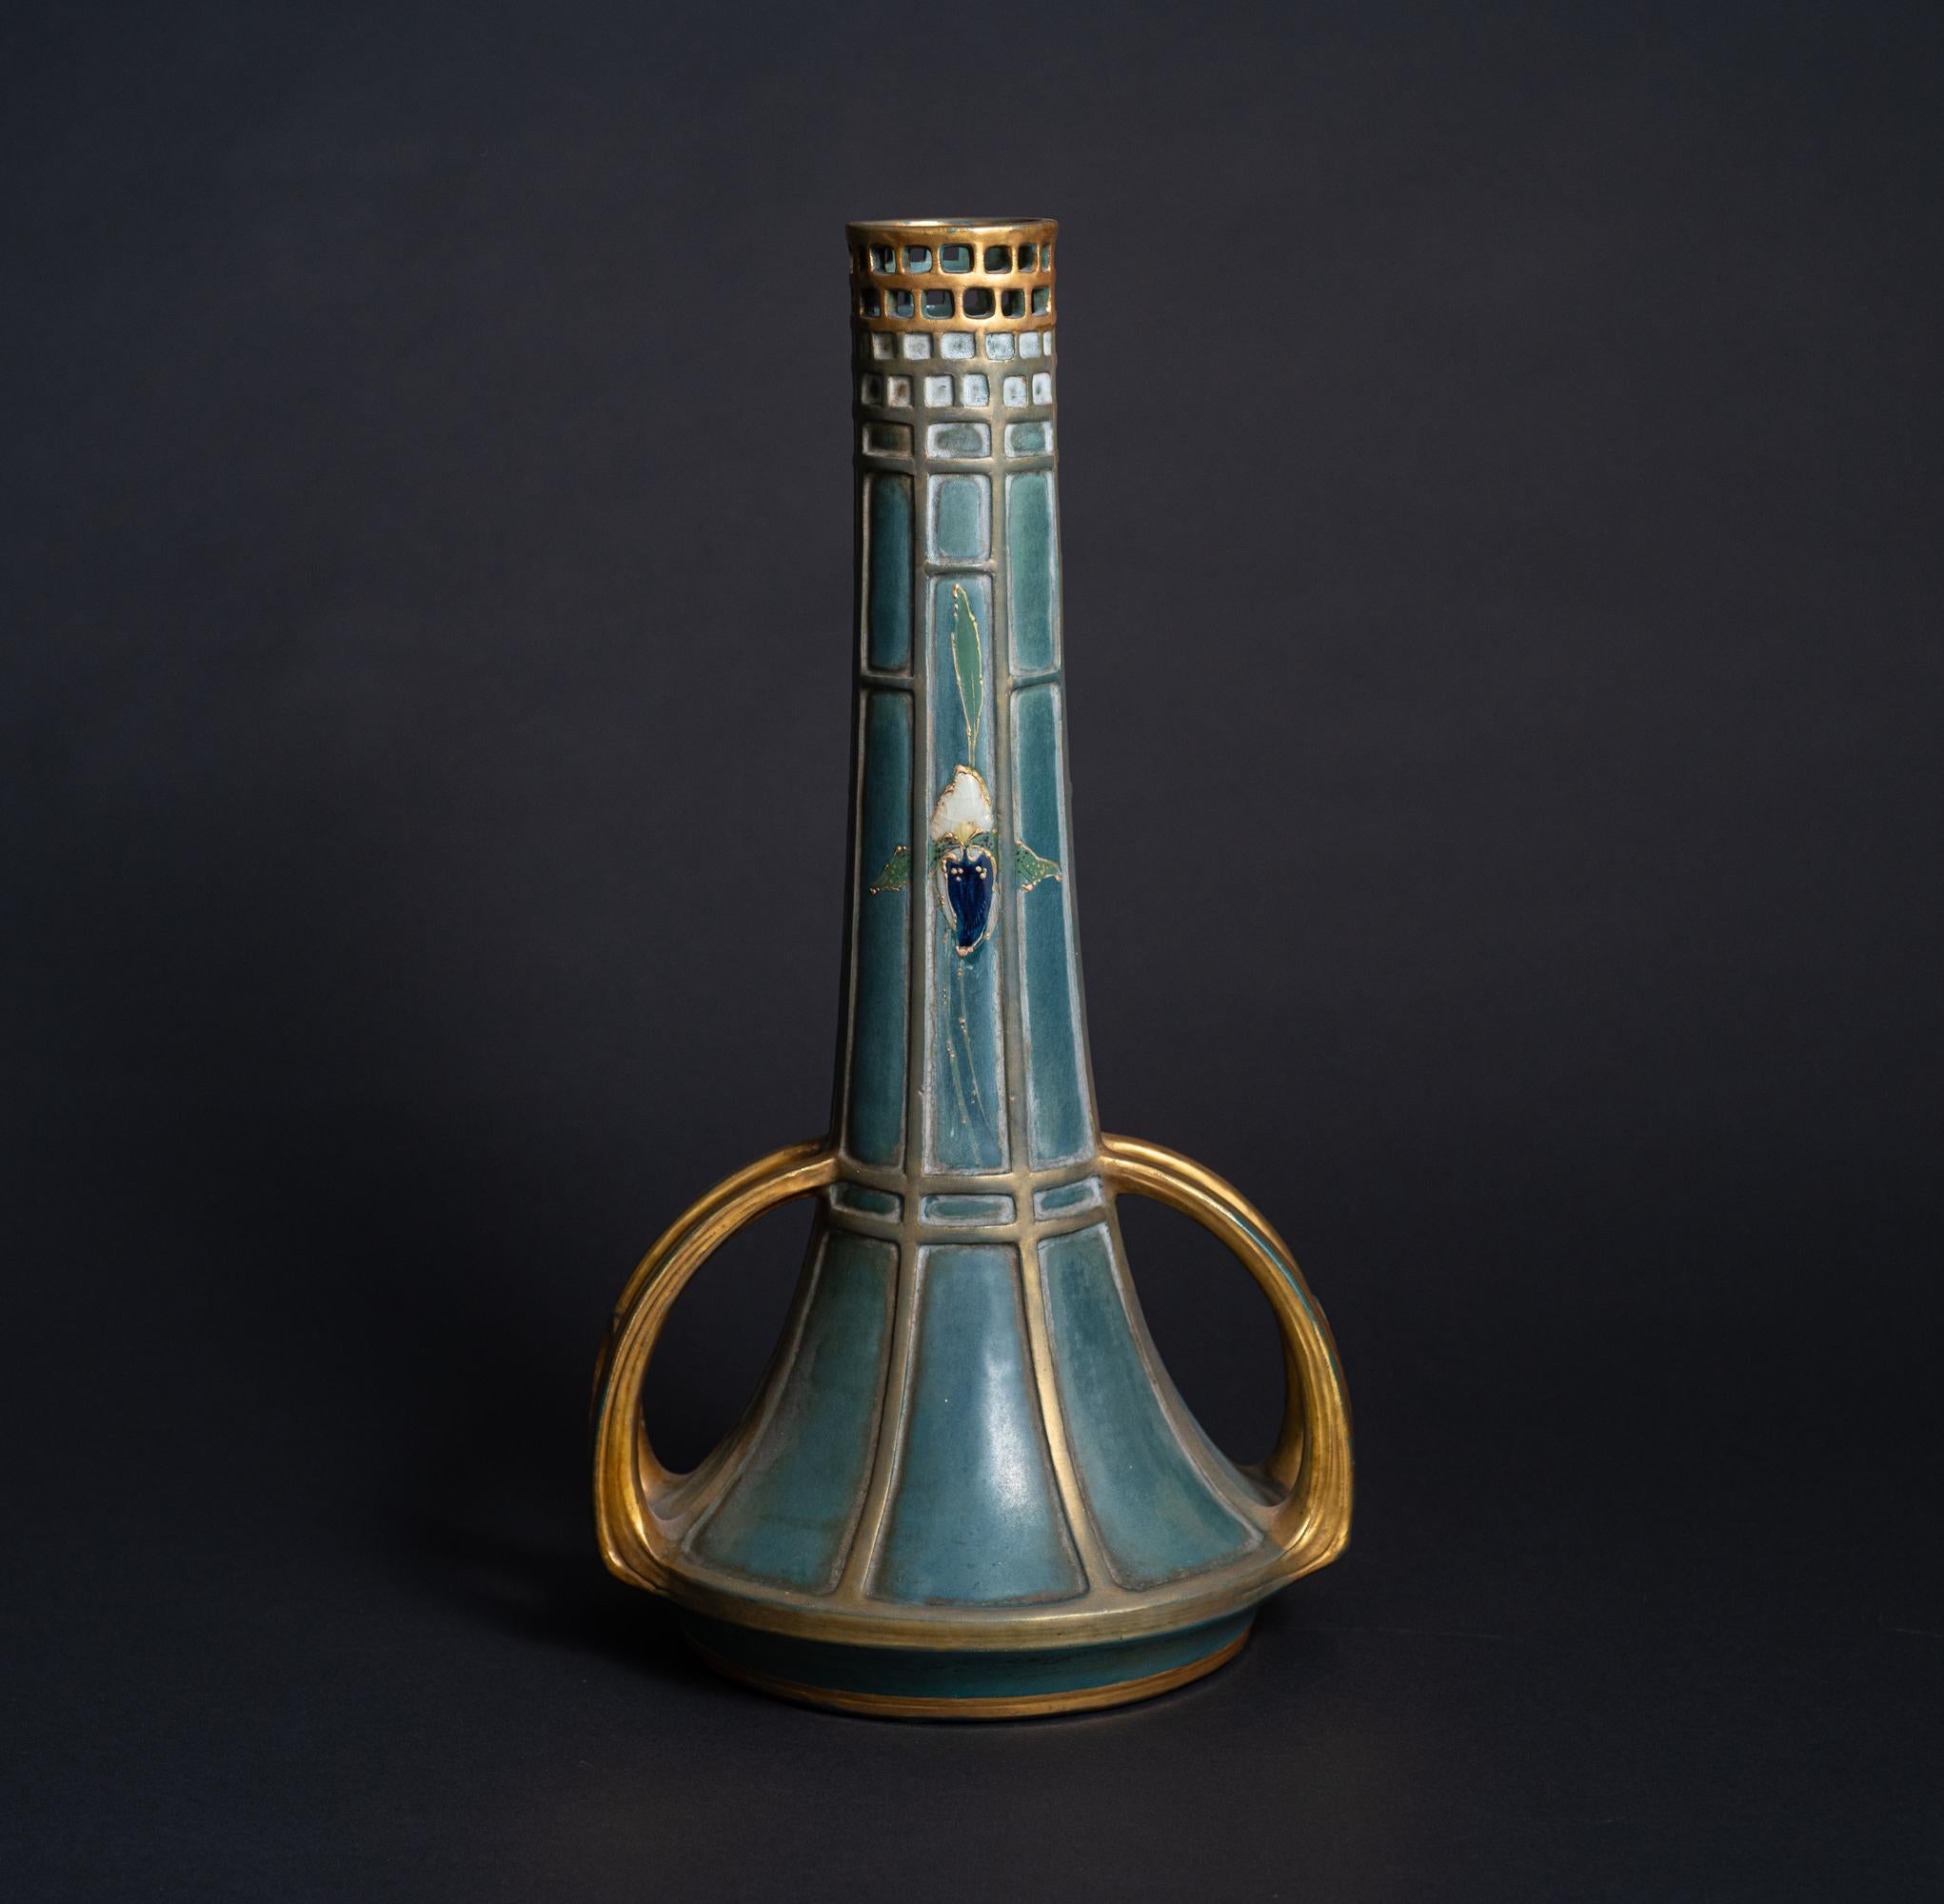 Glazed Two-Handled Reticulated Art Nouveau Vase with Enamel Flowers by Paul Dachsel